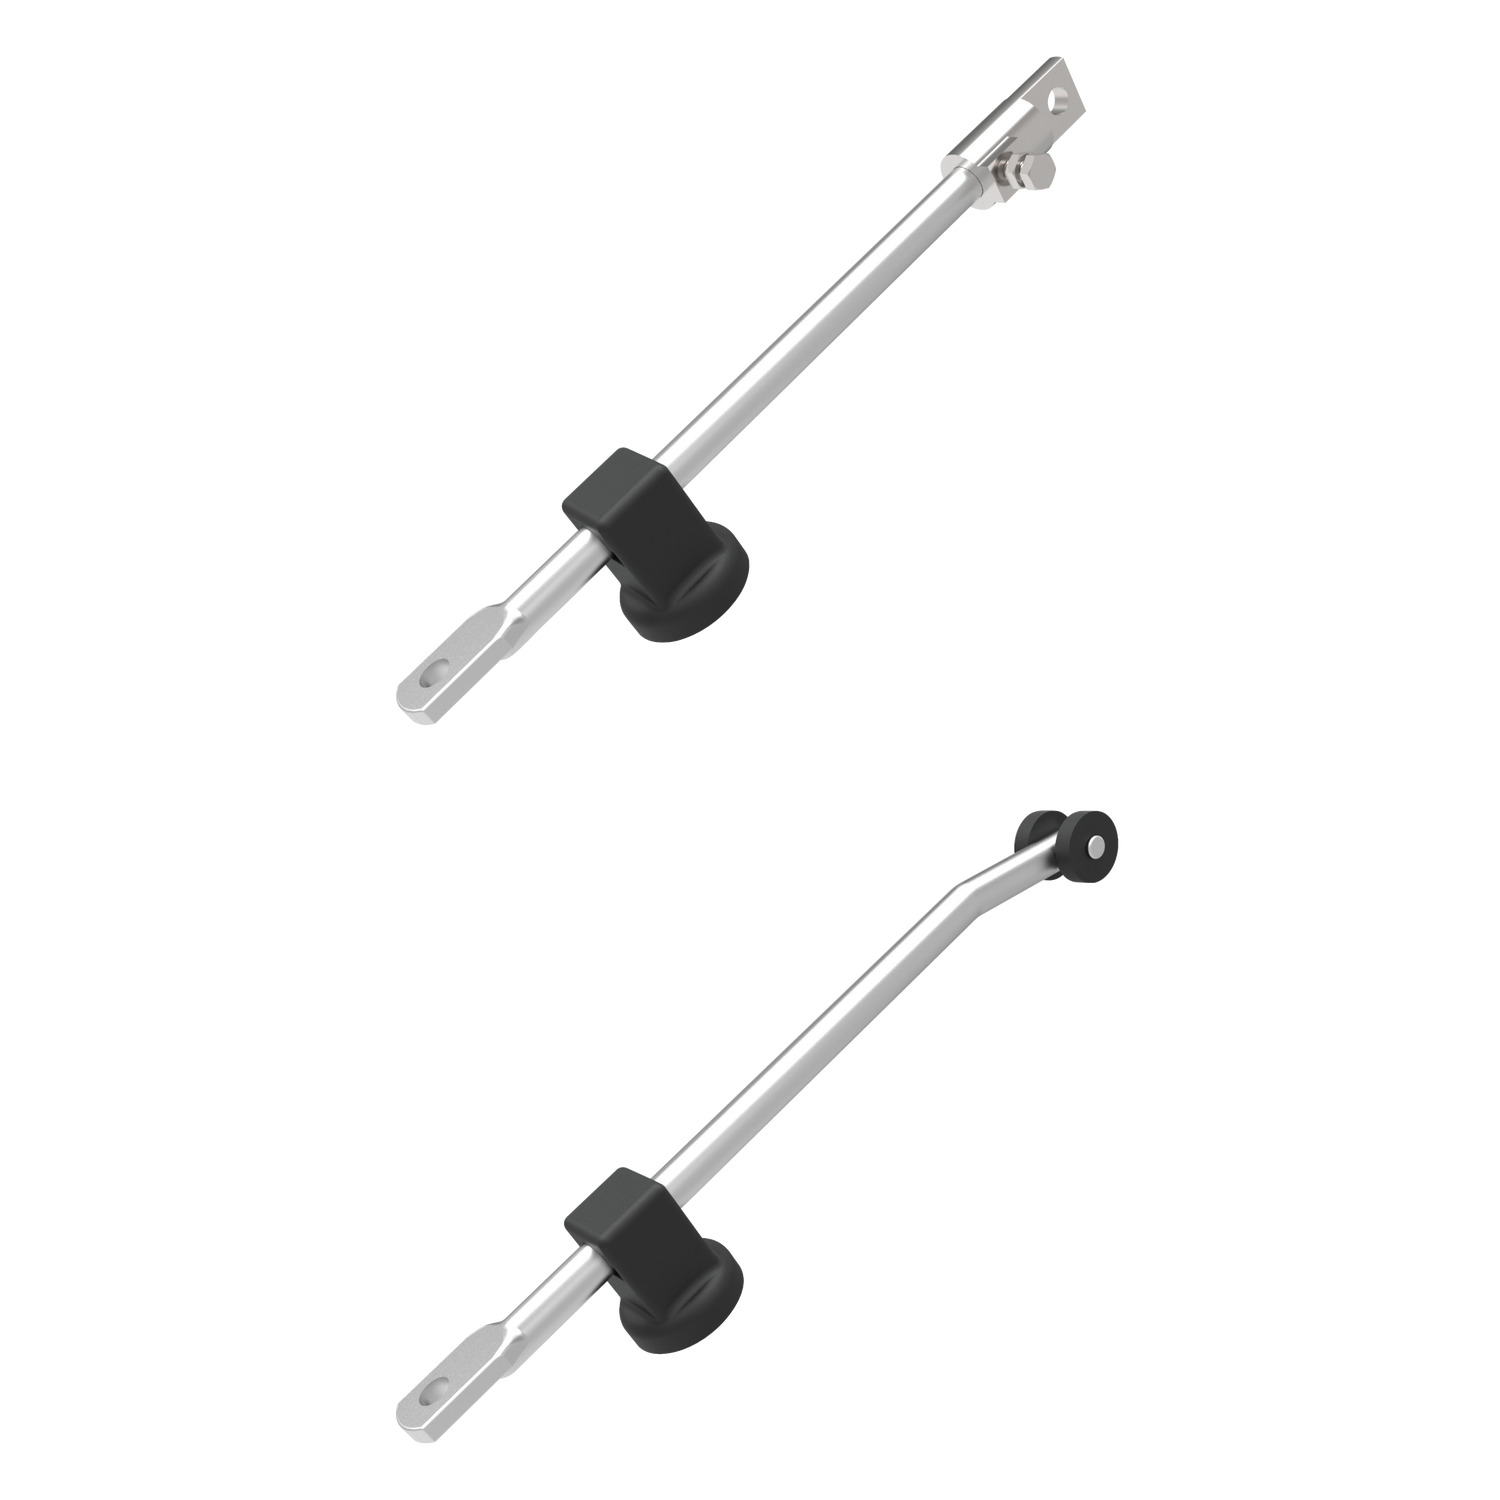 A0303.AW1060 Multi-Point Latching round rod - Steel, Zinc Plated - L=600mm